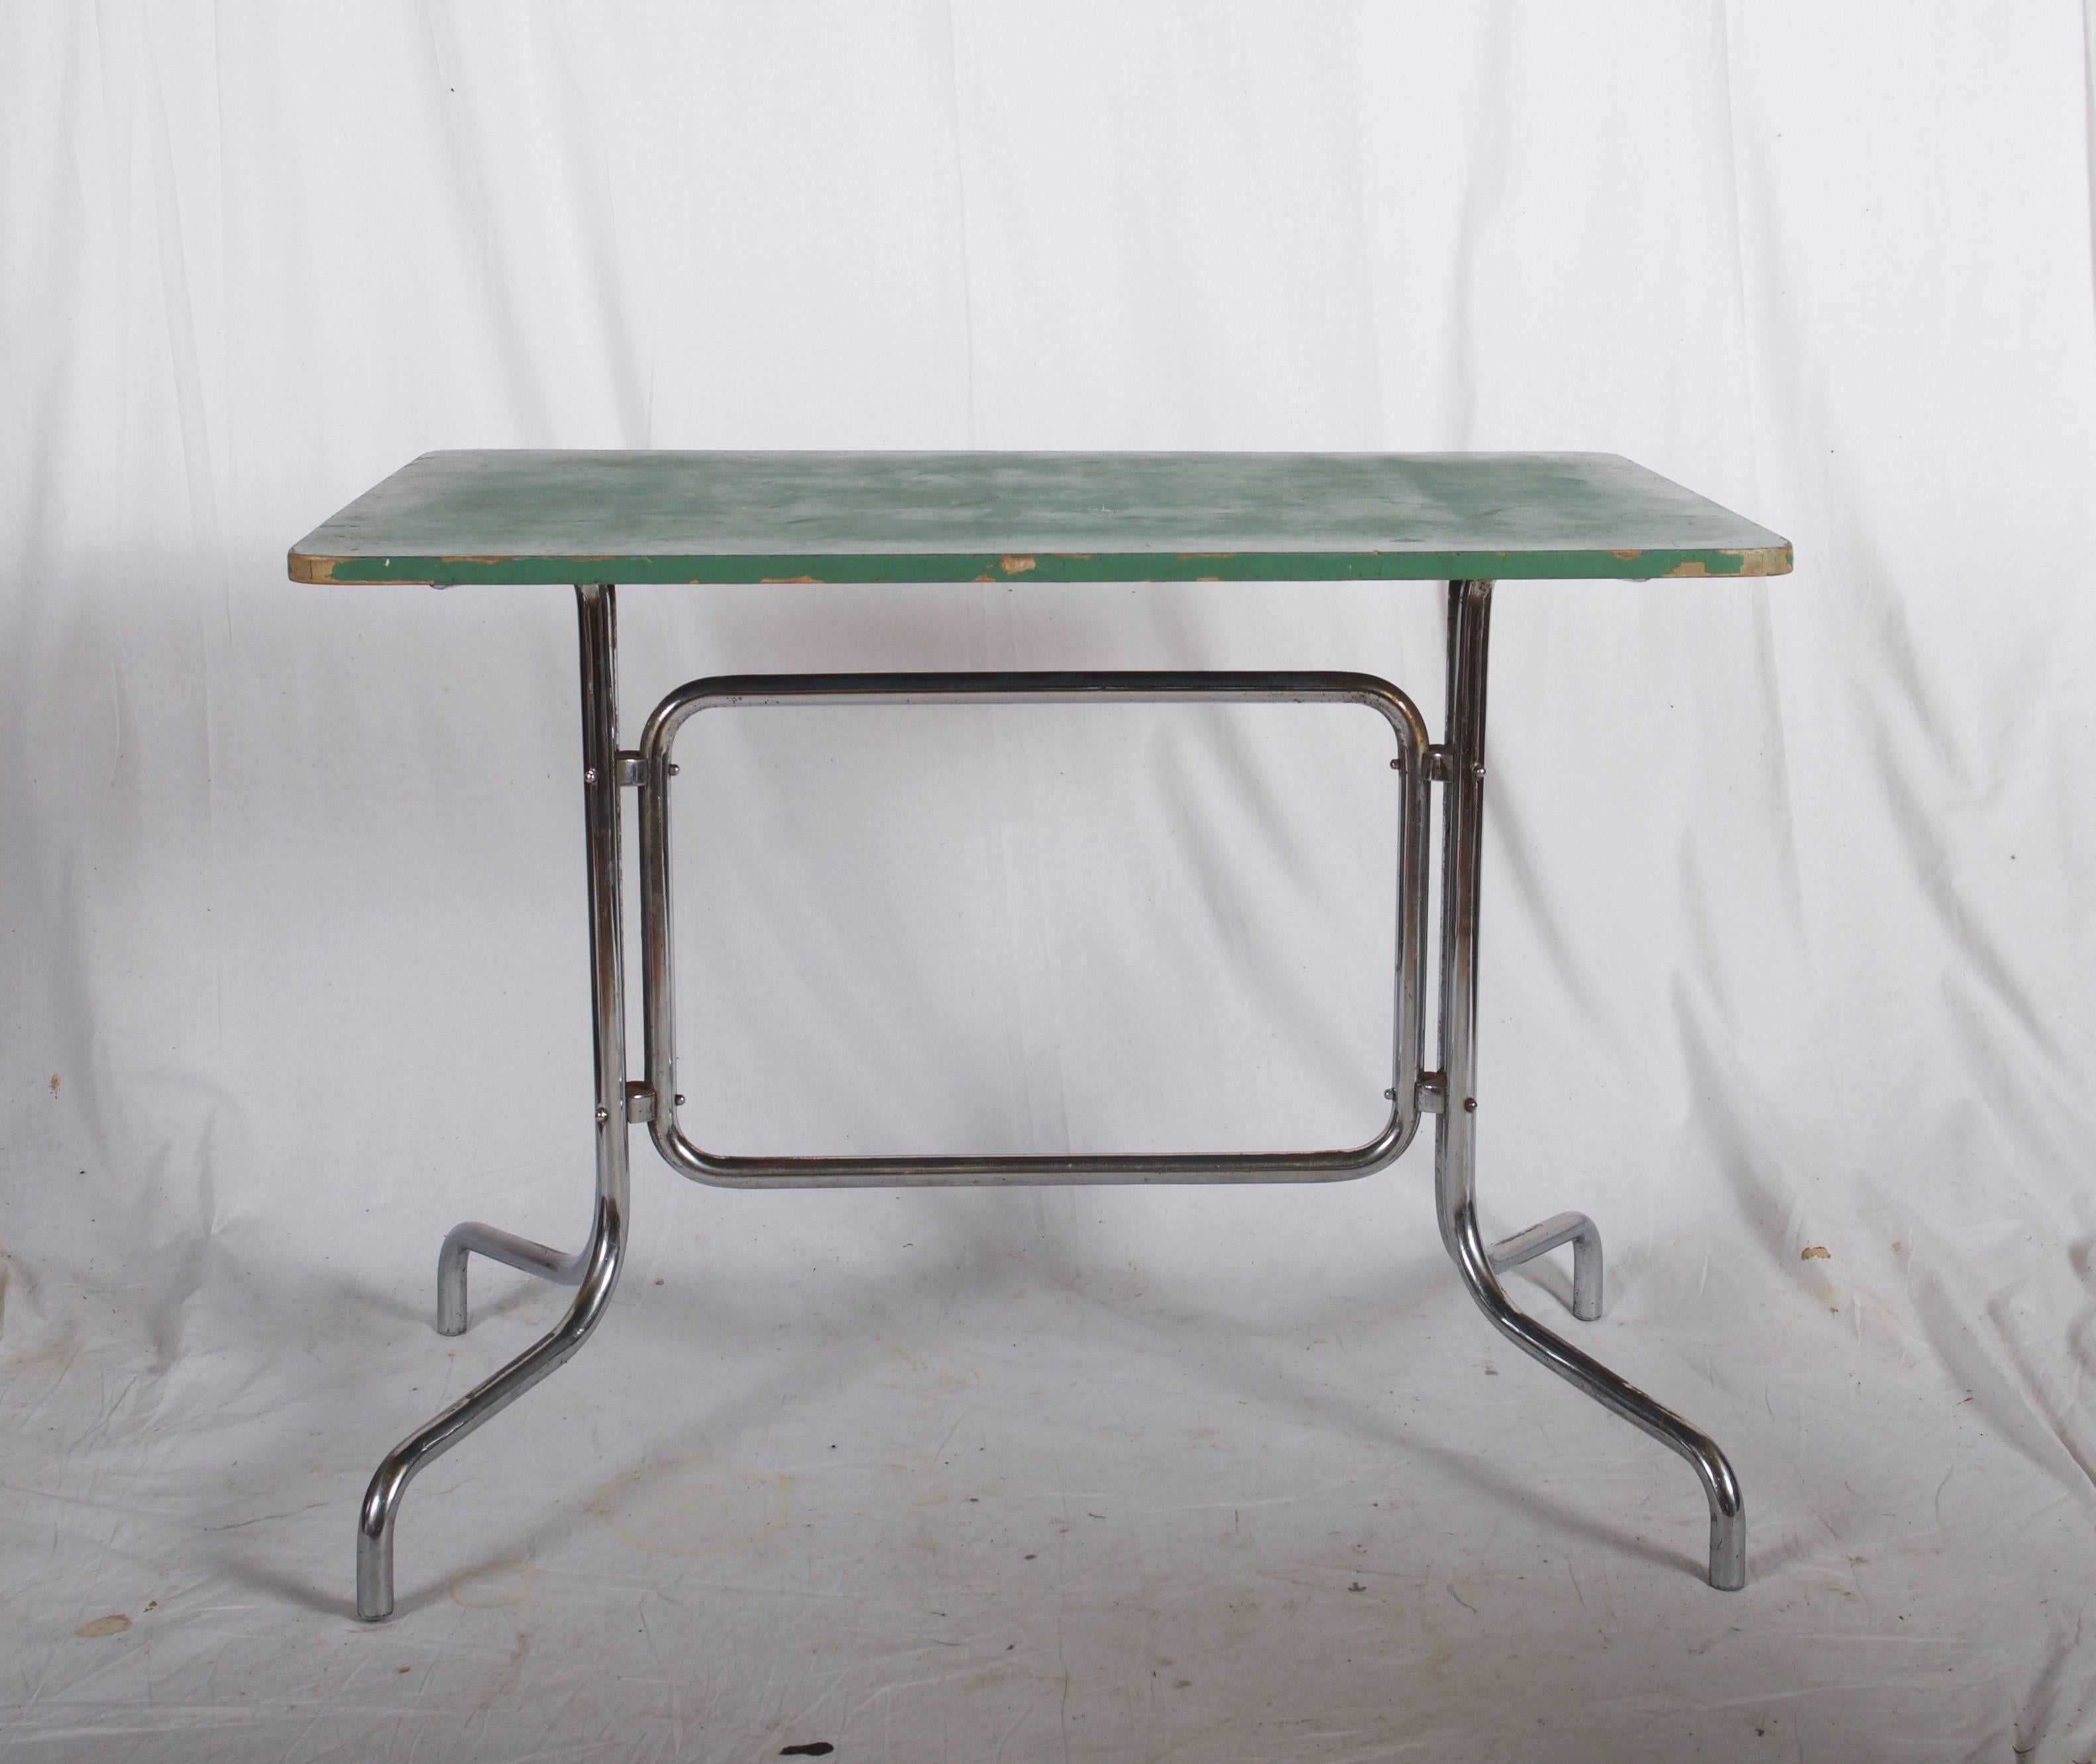 Steel tube construction chromed with wooden tabletop blue or green painted, designed in the 1930s by Marcel Breuer for Mücke & Melder.
Very good original condition with some surface rust and paint abrasion. Mücke Melder plaquette on the corner.